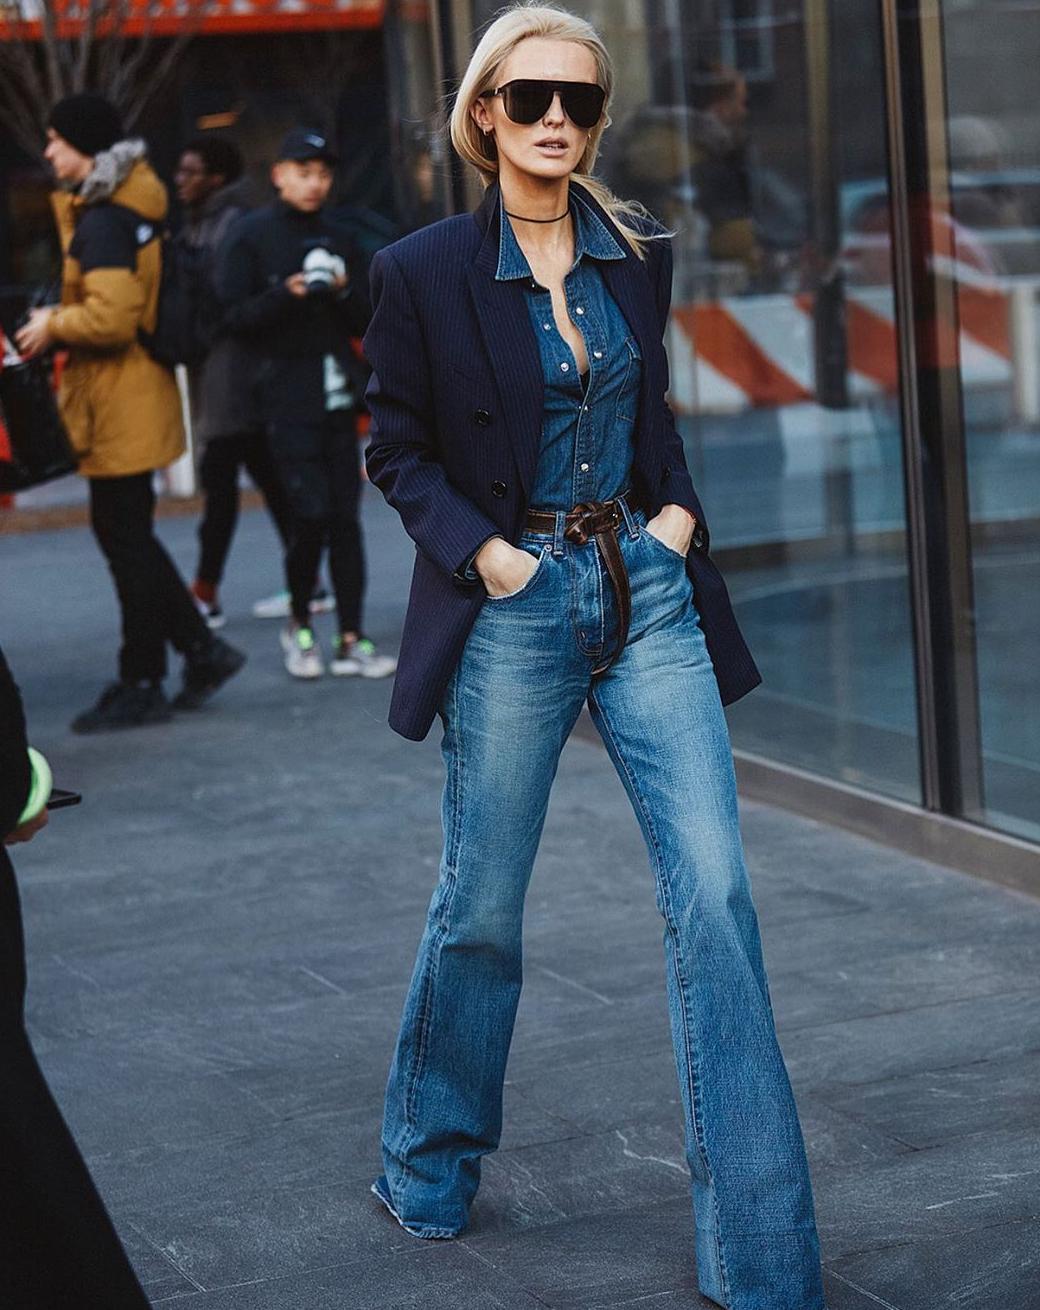 Are Denim Shirts In Style: Keep An Eye On The Best Style To Try 2022